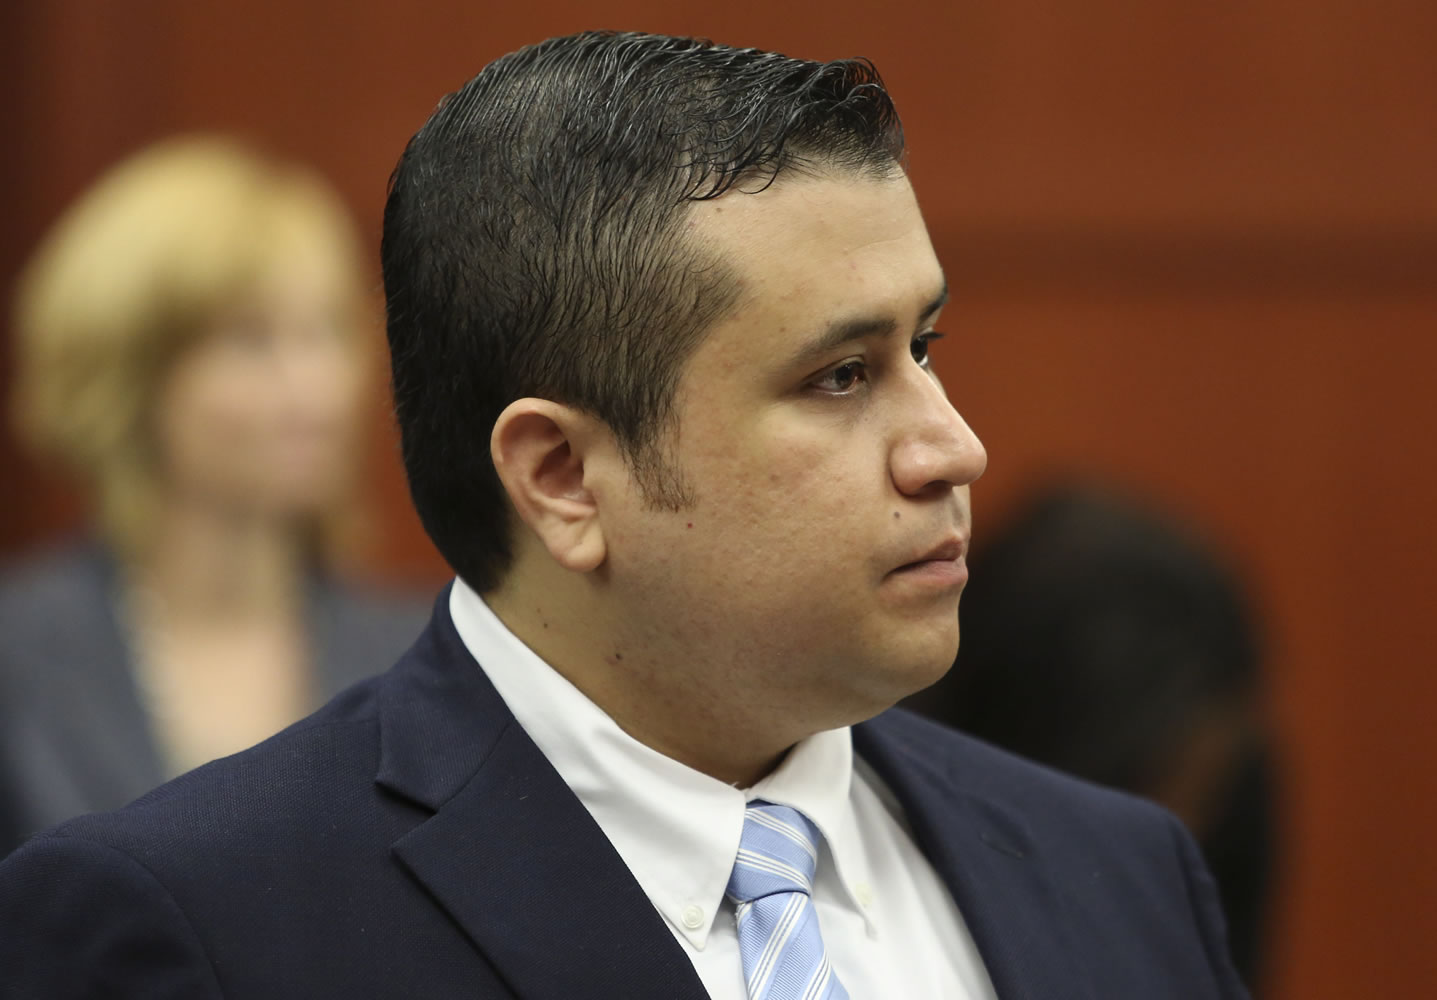 George Zimmerman stands for potential jurors as they enter the courtroom for his trial in Seminole circuit court in Sanford, Fla., on Thursday.